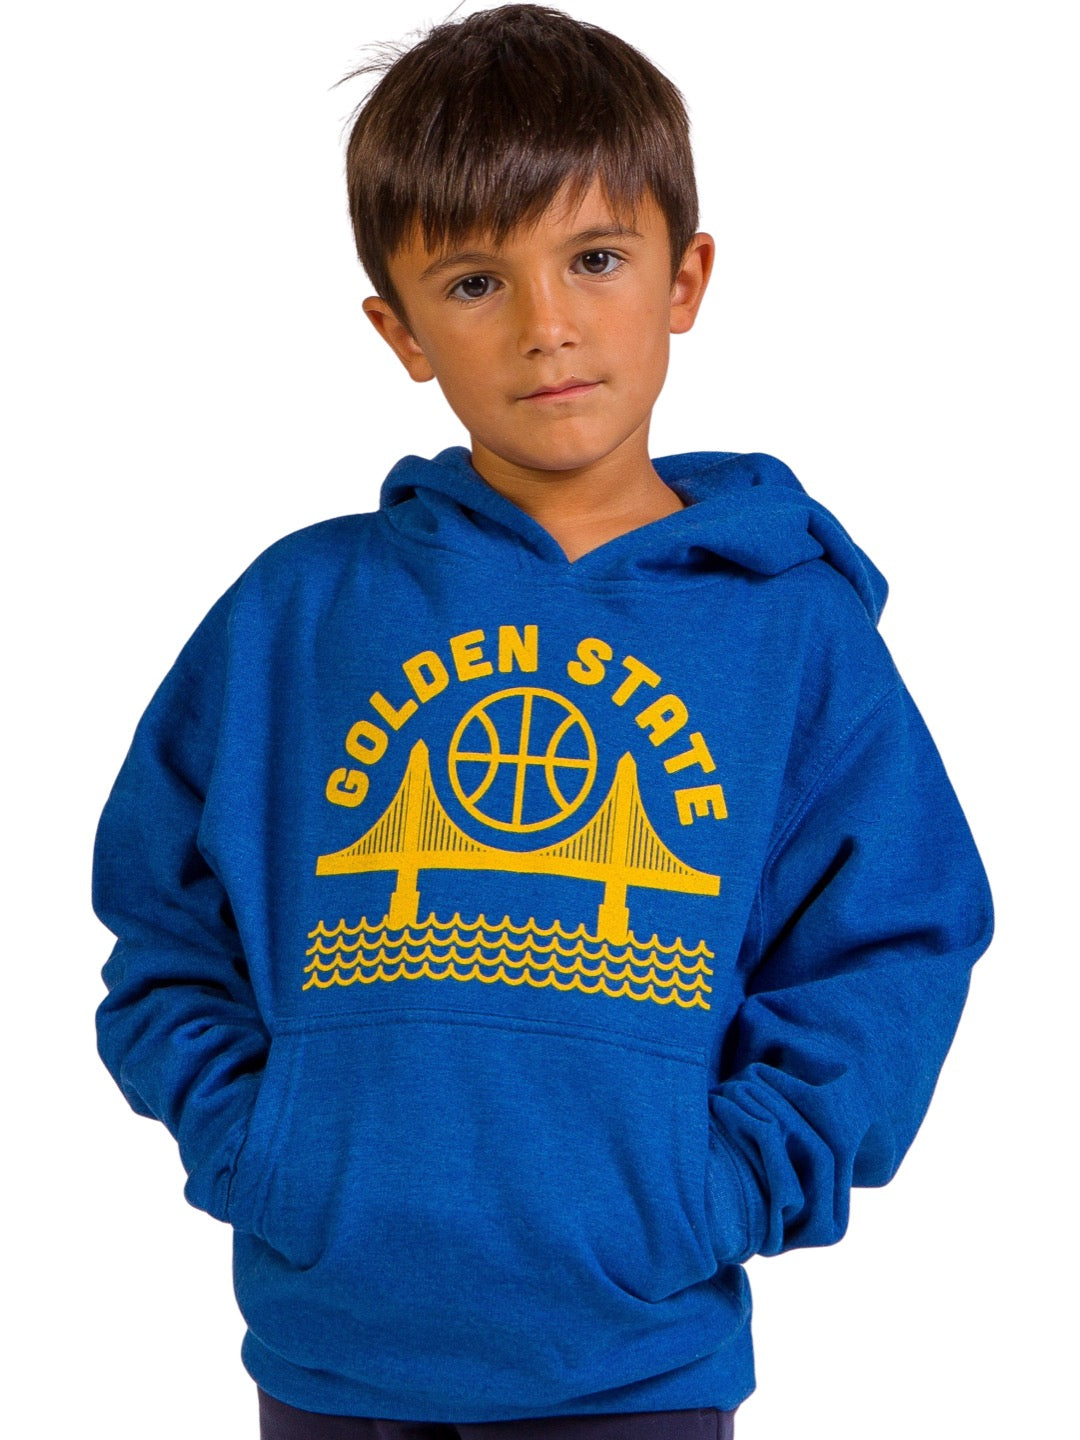 golden state warriors youth